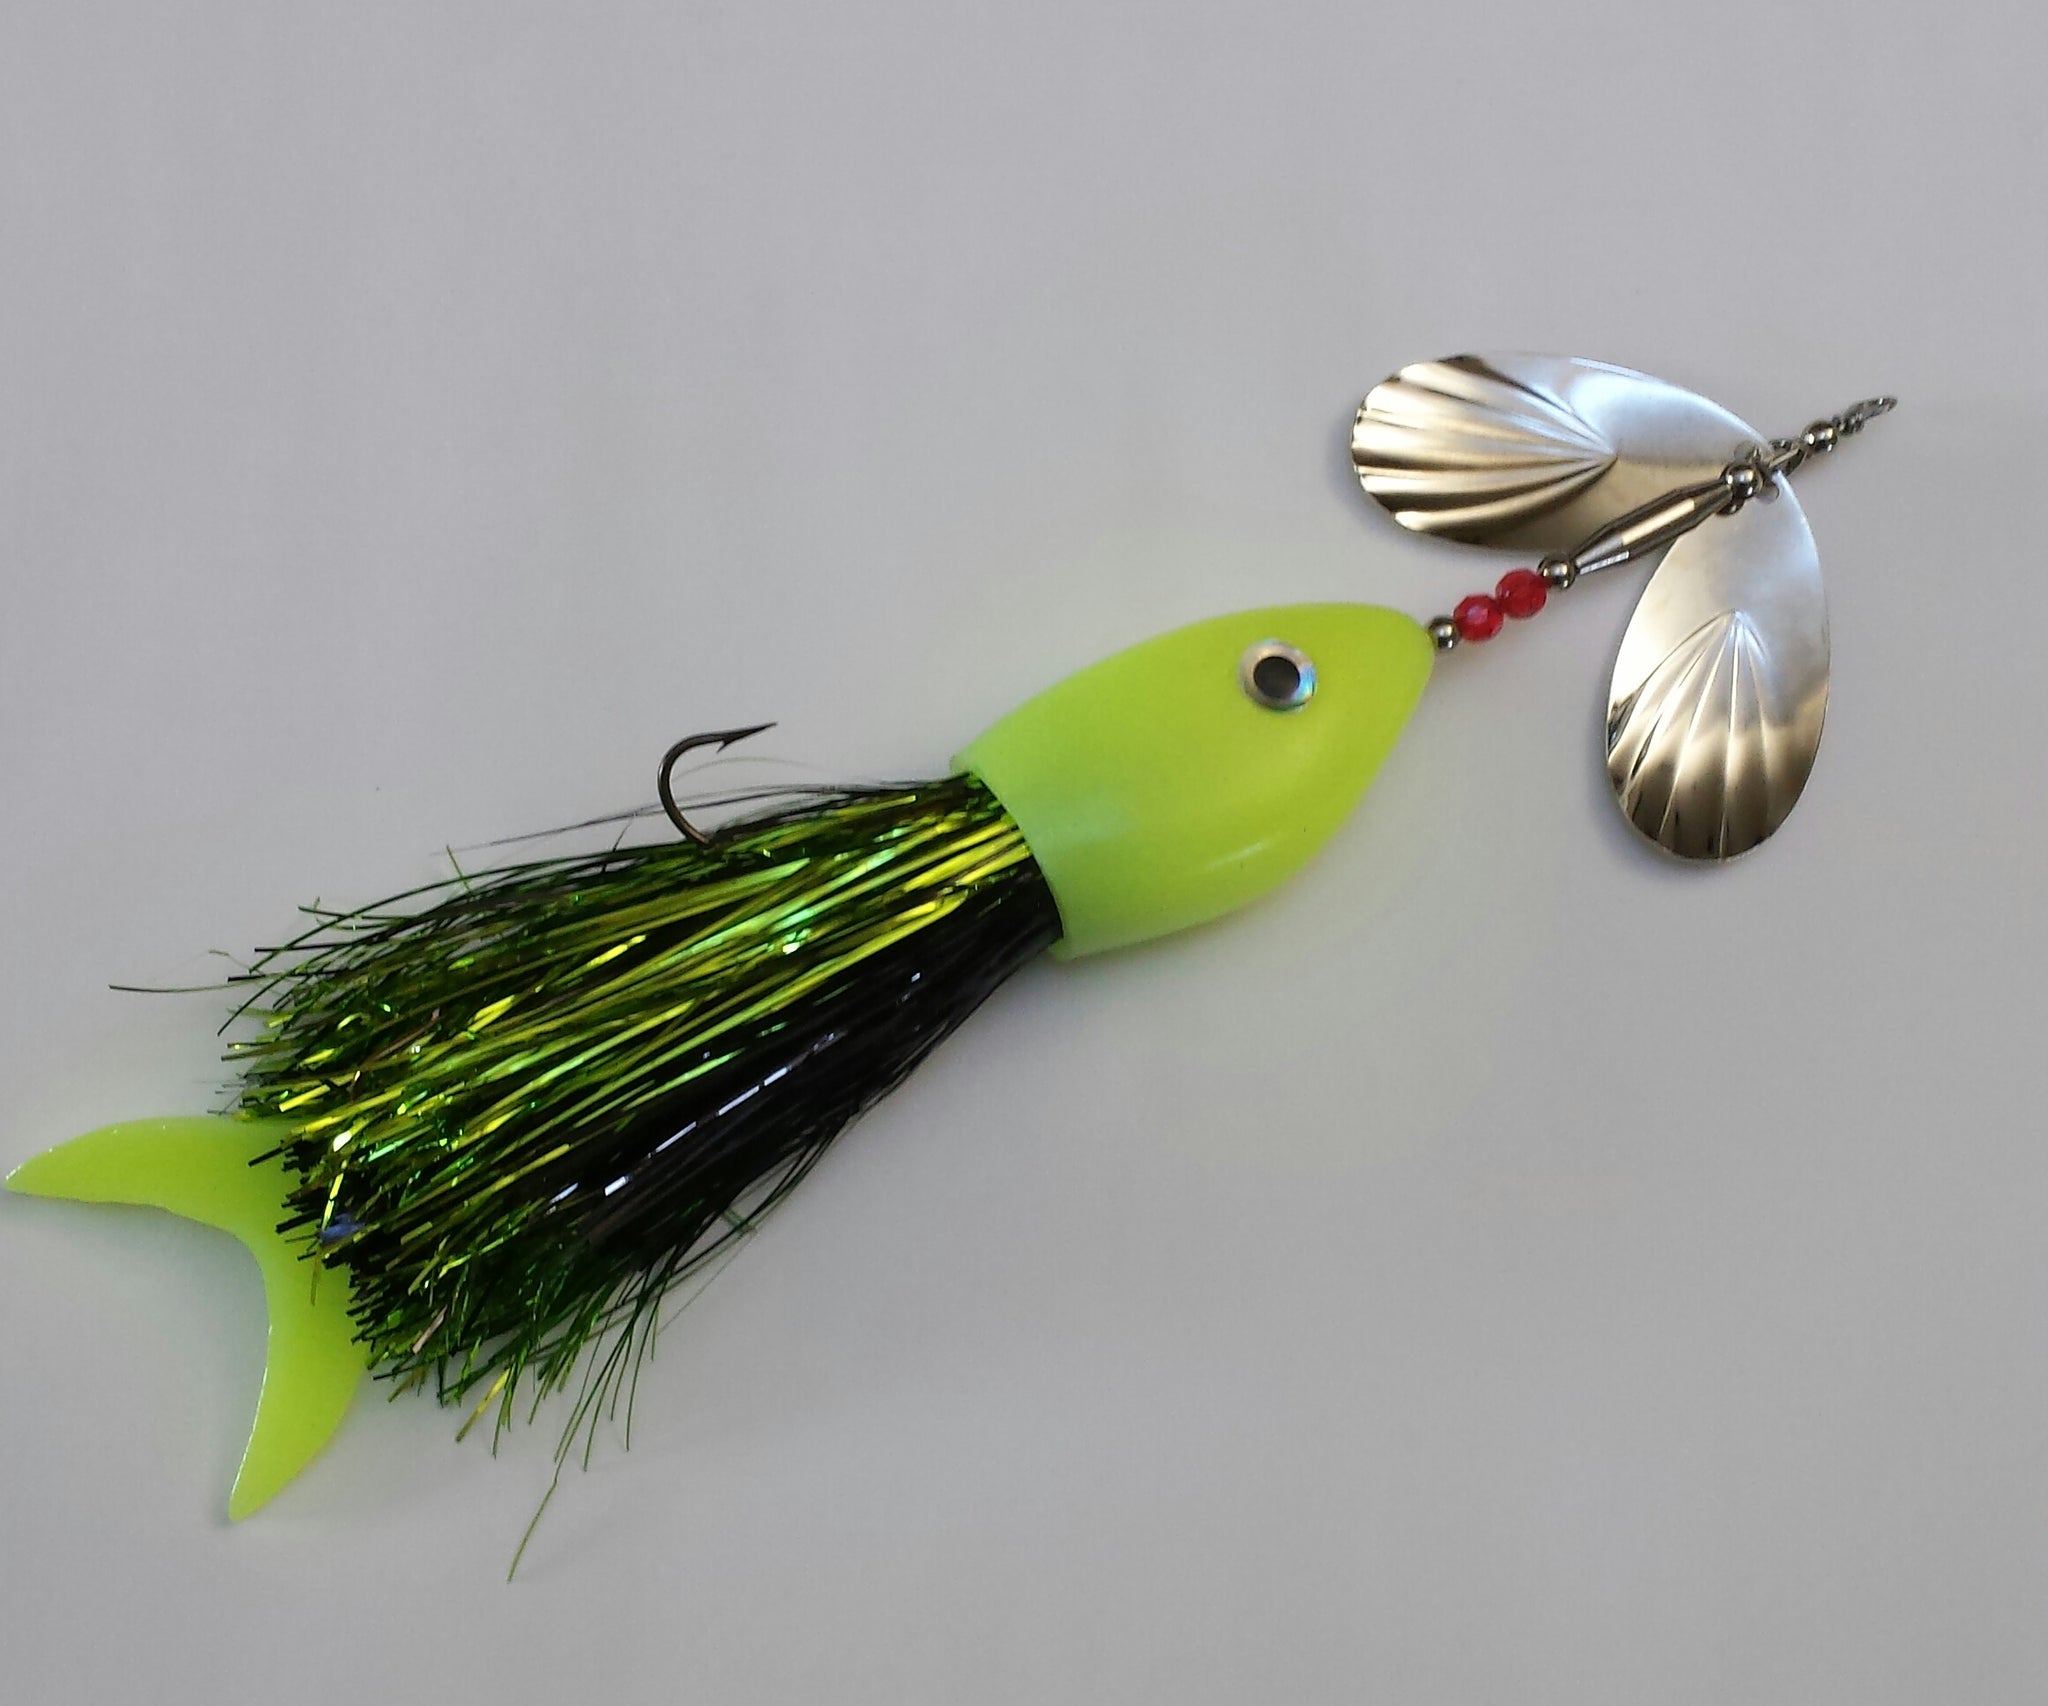 Muskie Bacon Airhead Deluxe Musky Lure – Muskie Bacon Lures